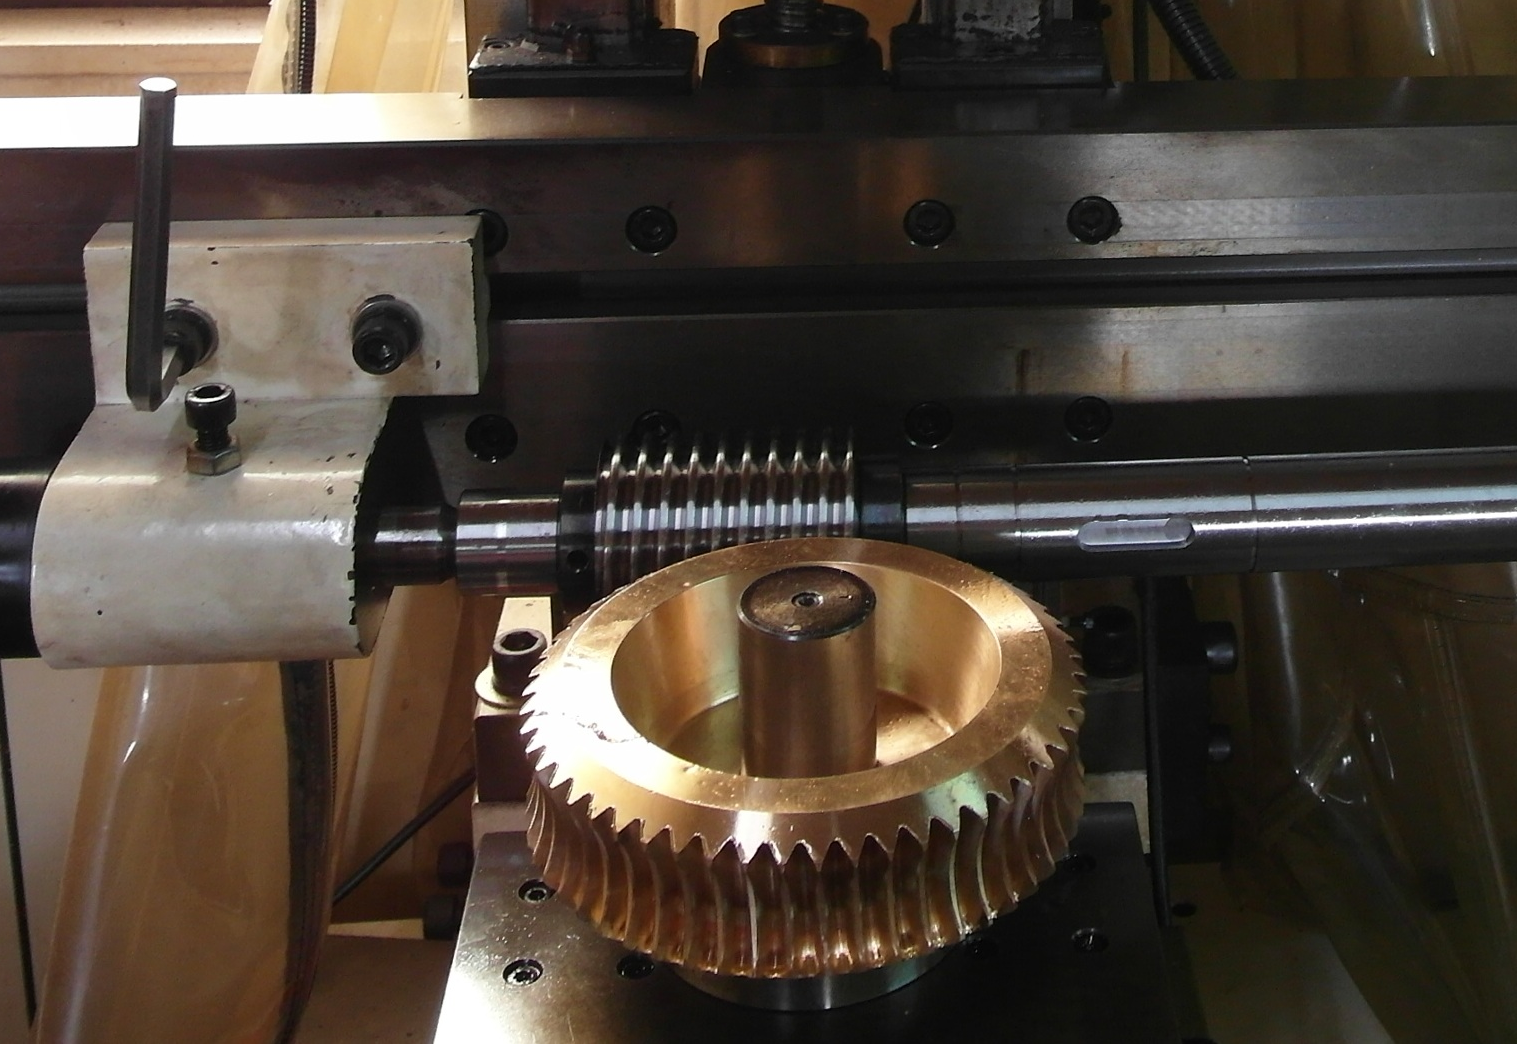 the Features of Worm Gears：Worm gears have several features that make them unique and highly desirable for many industrial applications